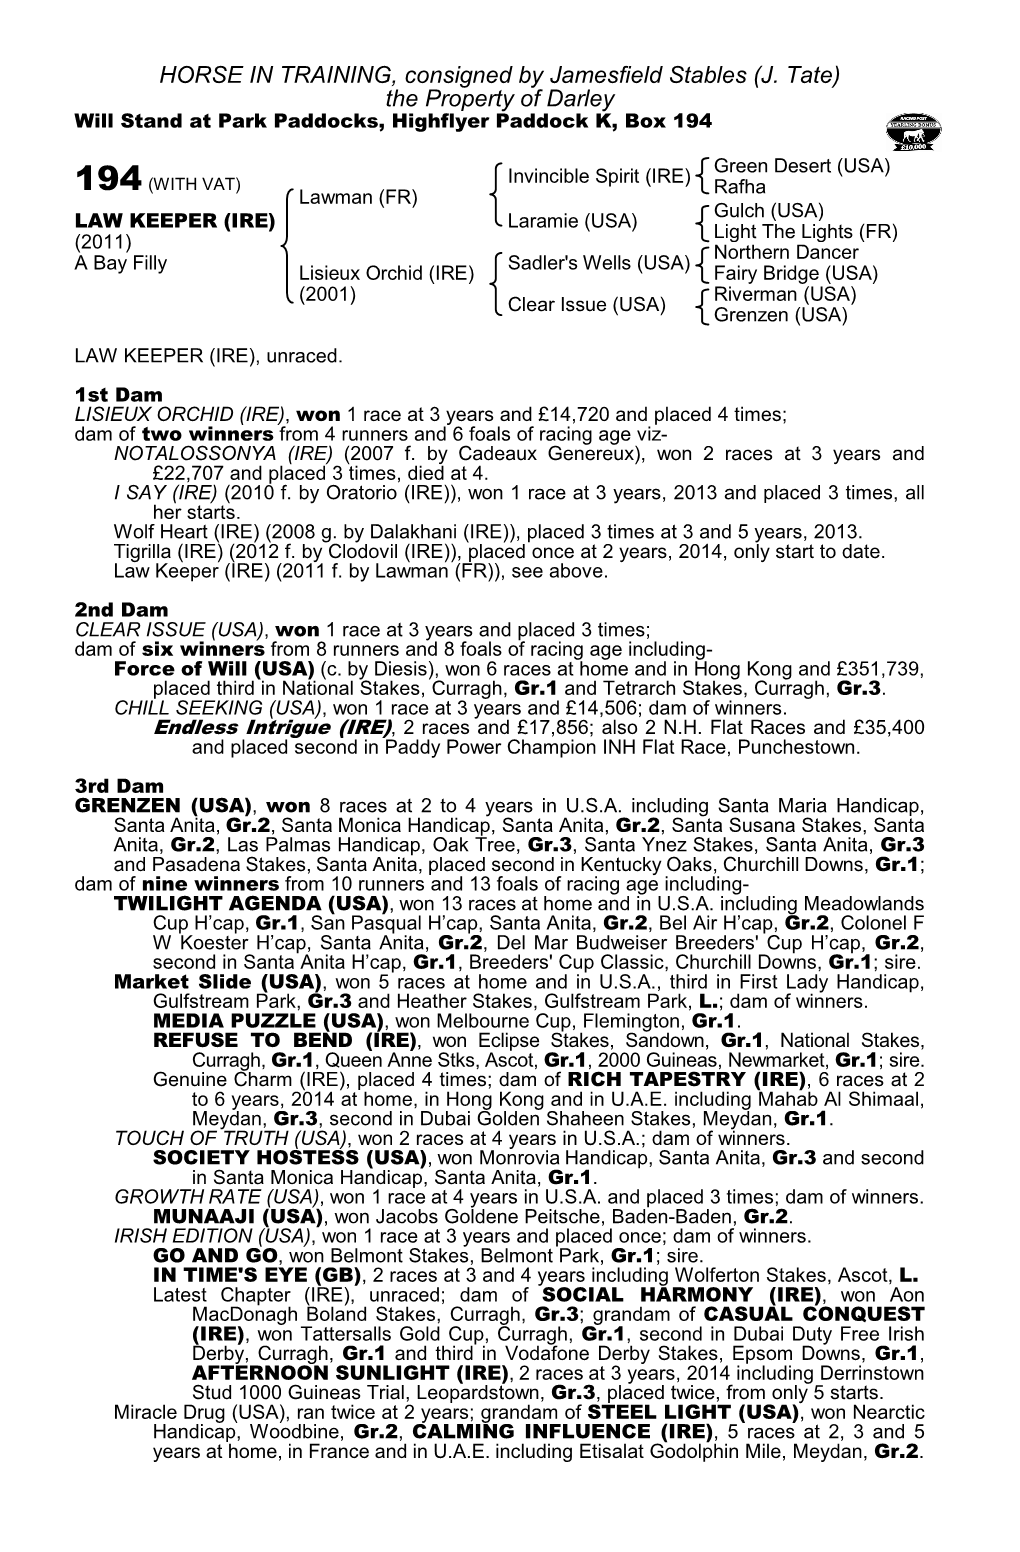 HORSE in TRAINING, Consigned by Jamesfield Stables (J. Tate) the Property of Darley Will Stand at Park Paddocks, Highflyer Paddock K, Box 194